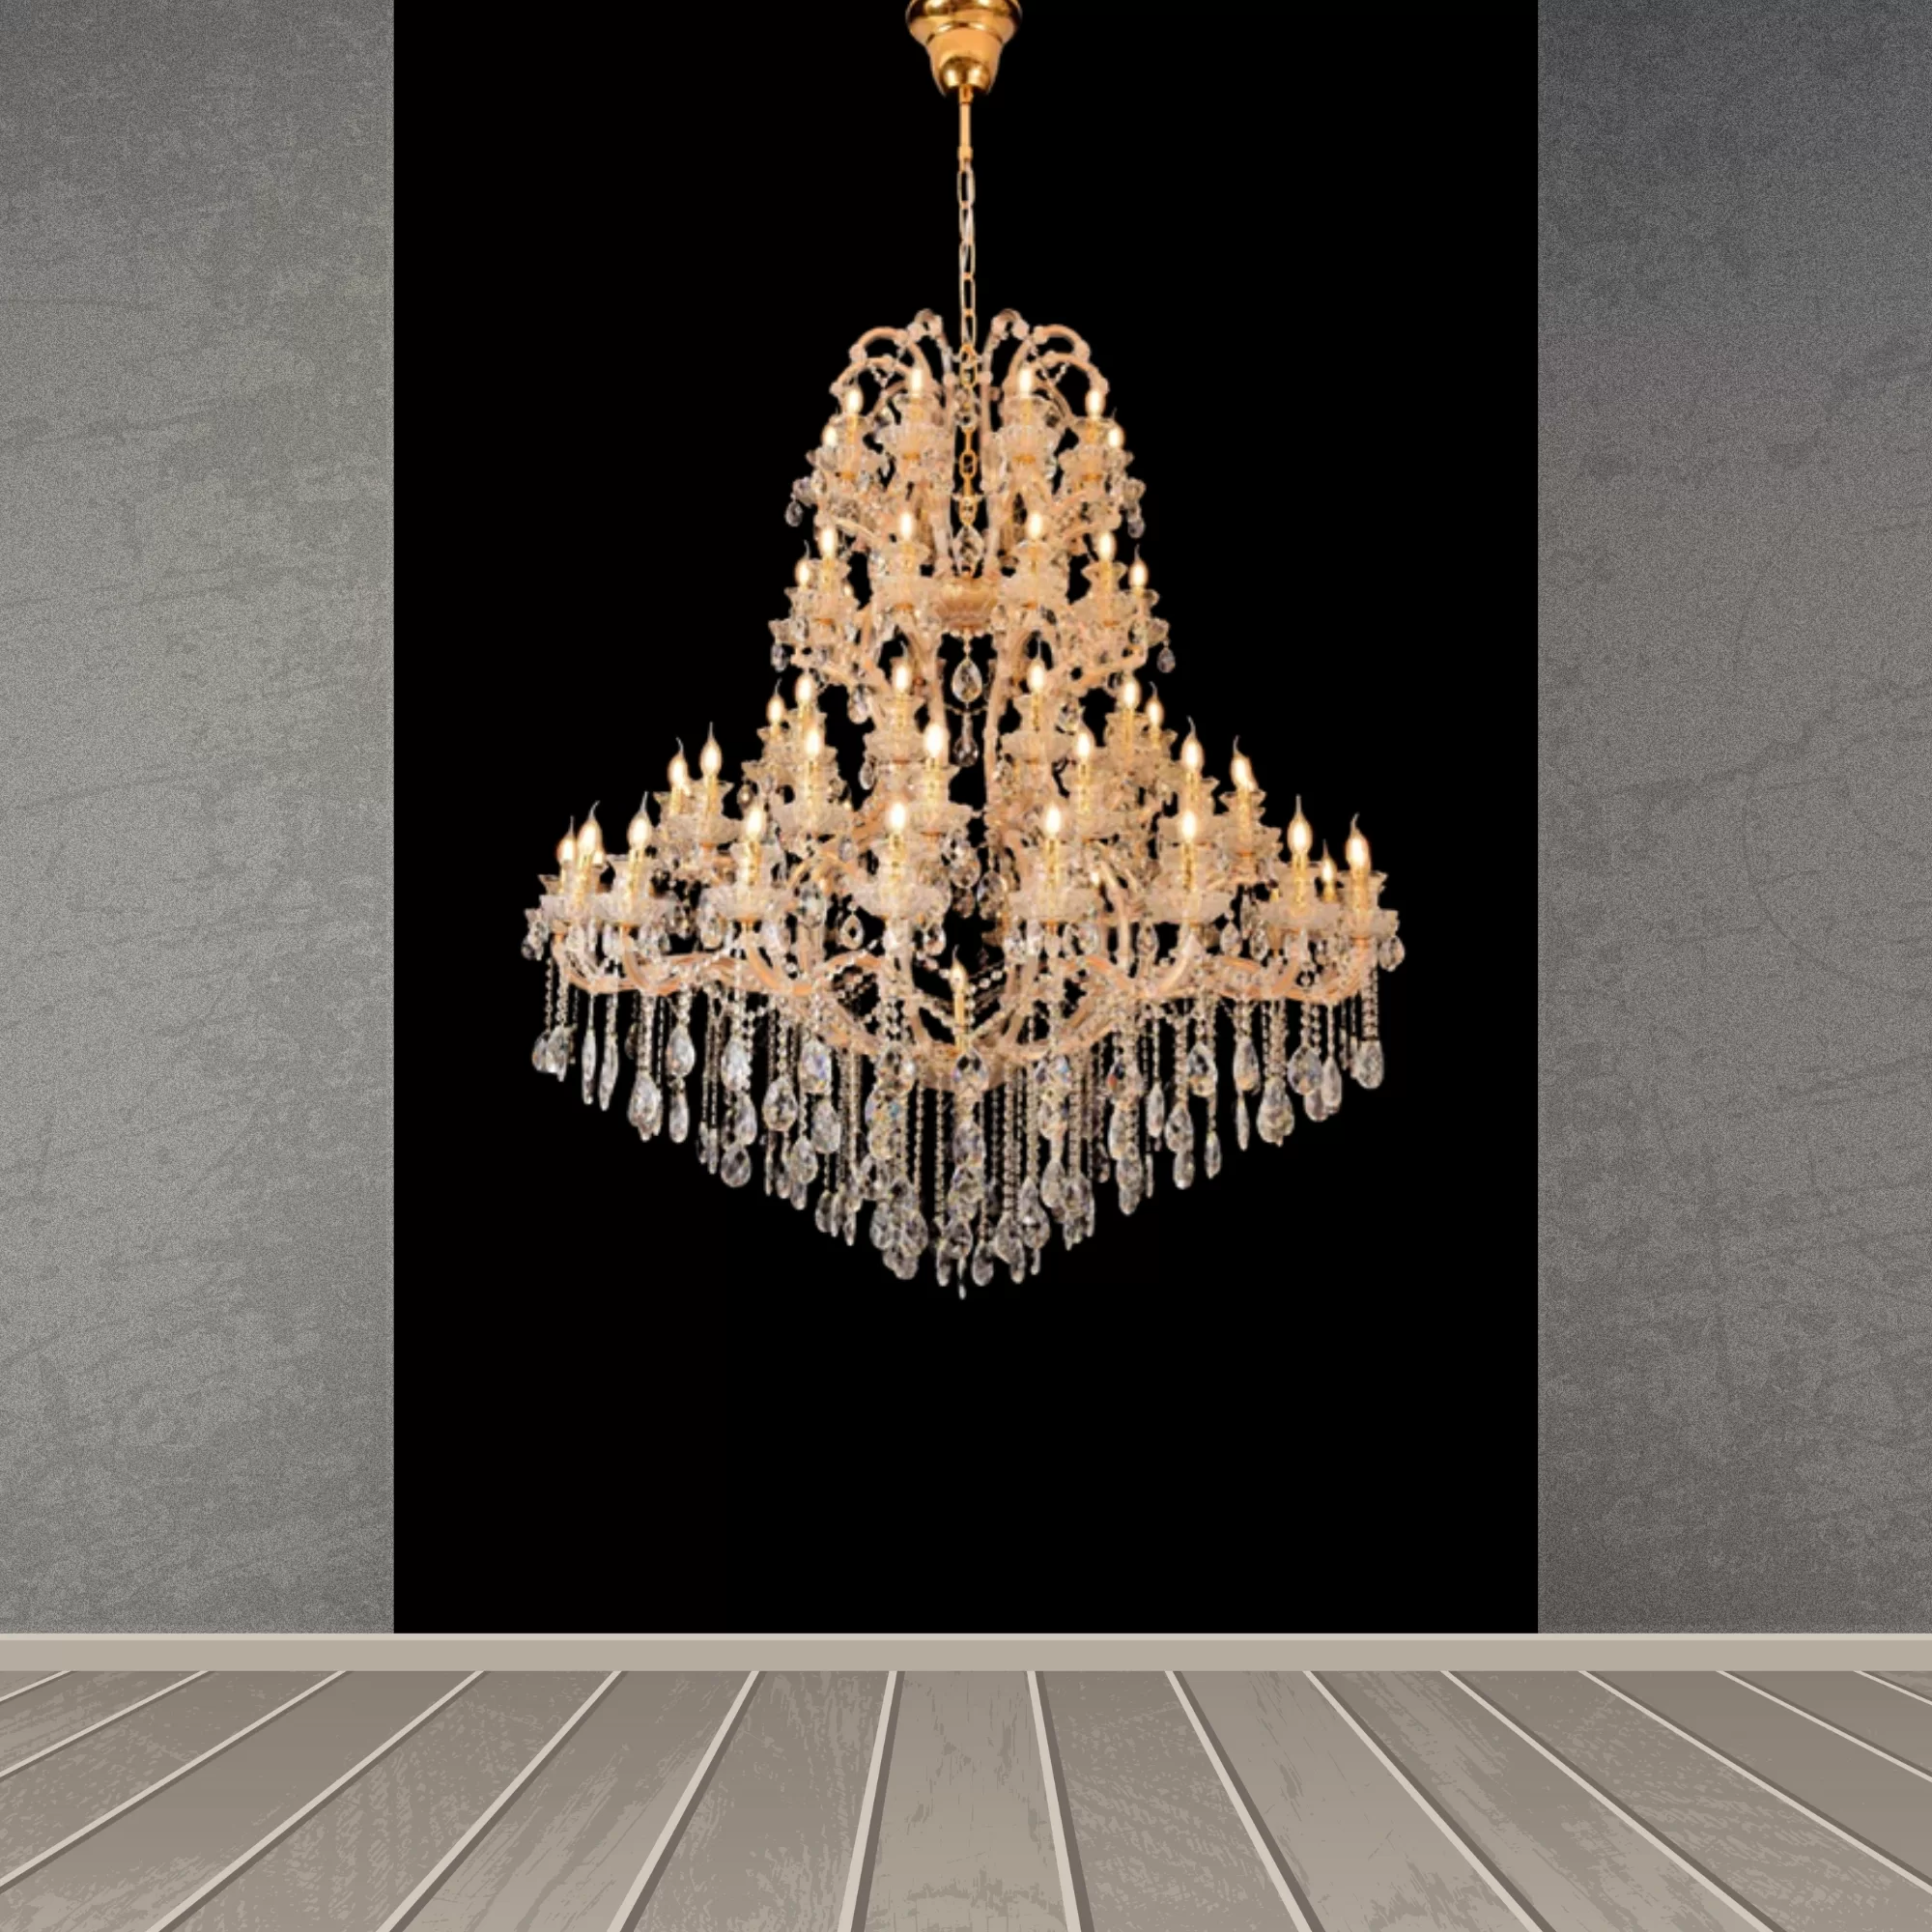 791-71 Classic Crystal Chandelier